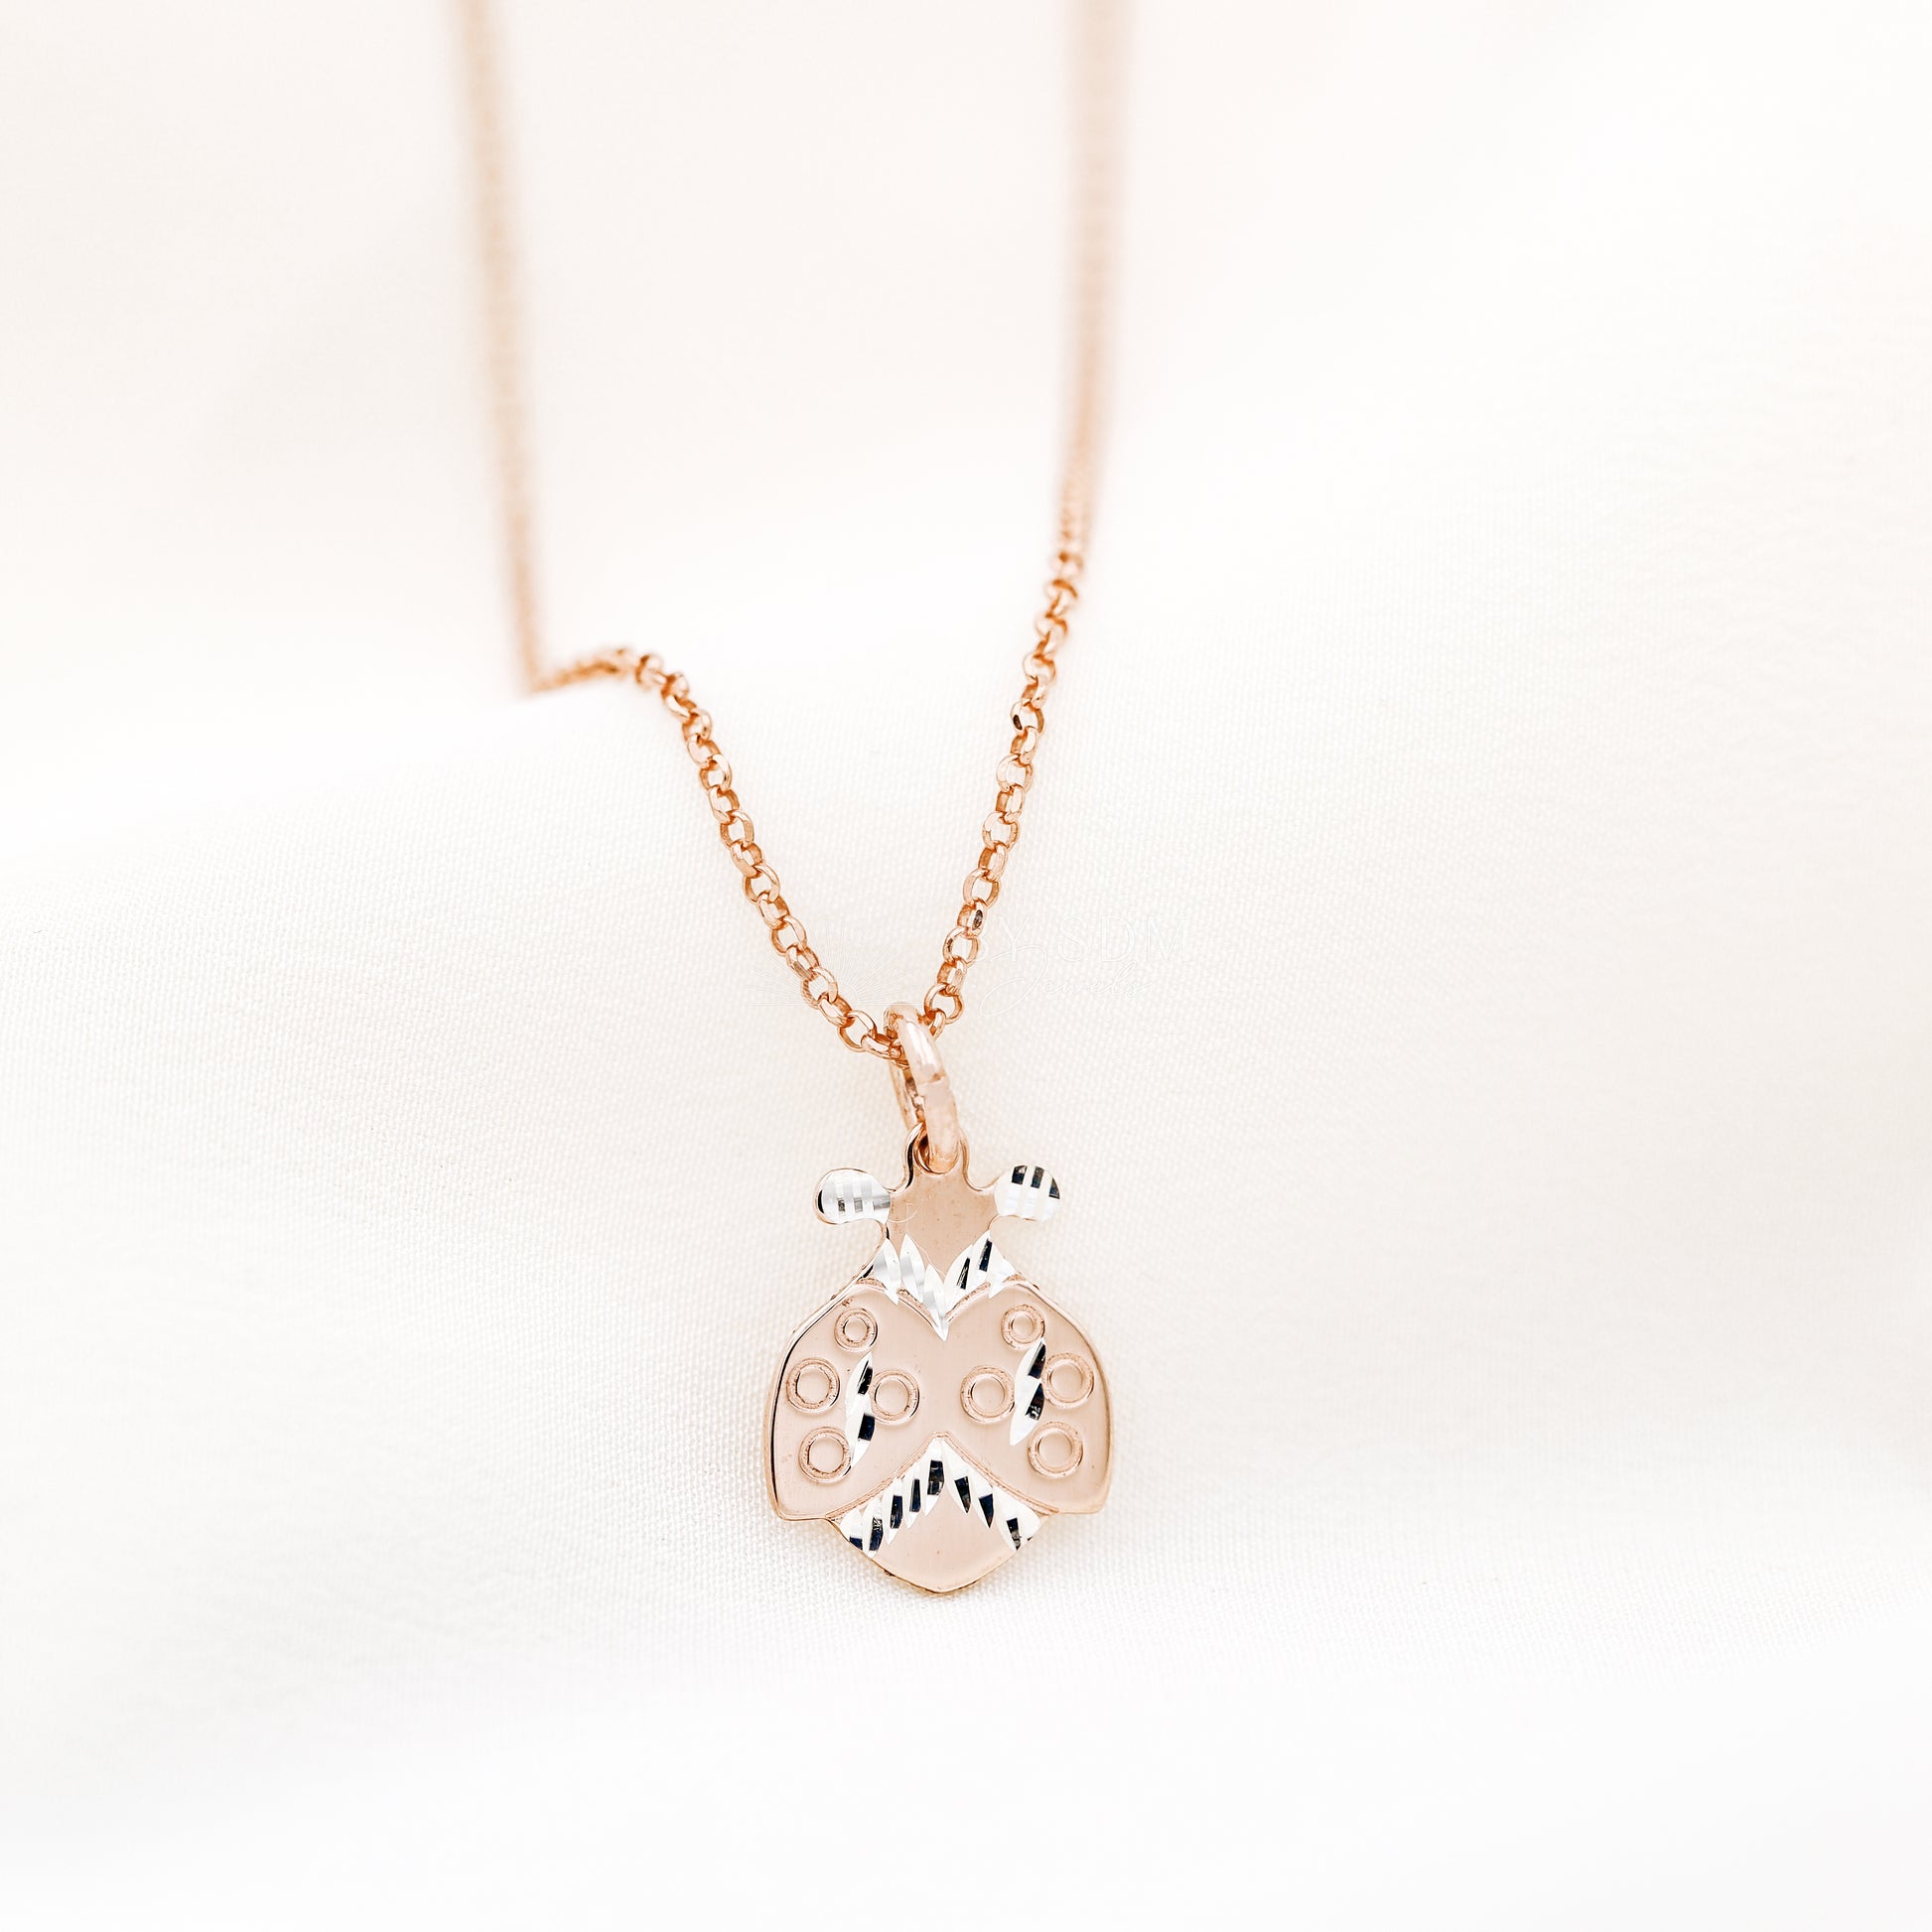 Dainty Ladybug Necklace, Diamond Cut Ladybug Charm, Kids Necklace, Gift Idea for Her, Christmas Present, Holiday Gift, Gold Silver Rose Gold